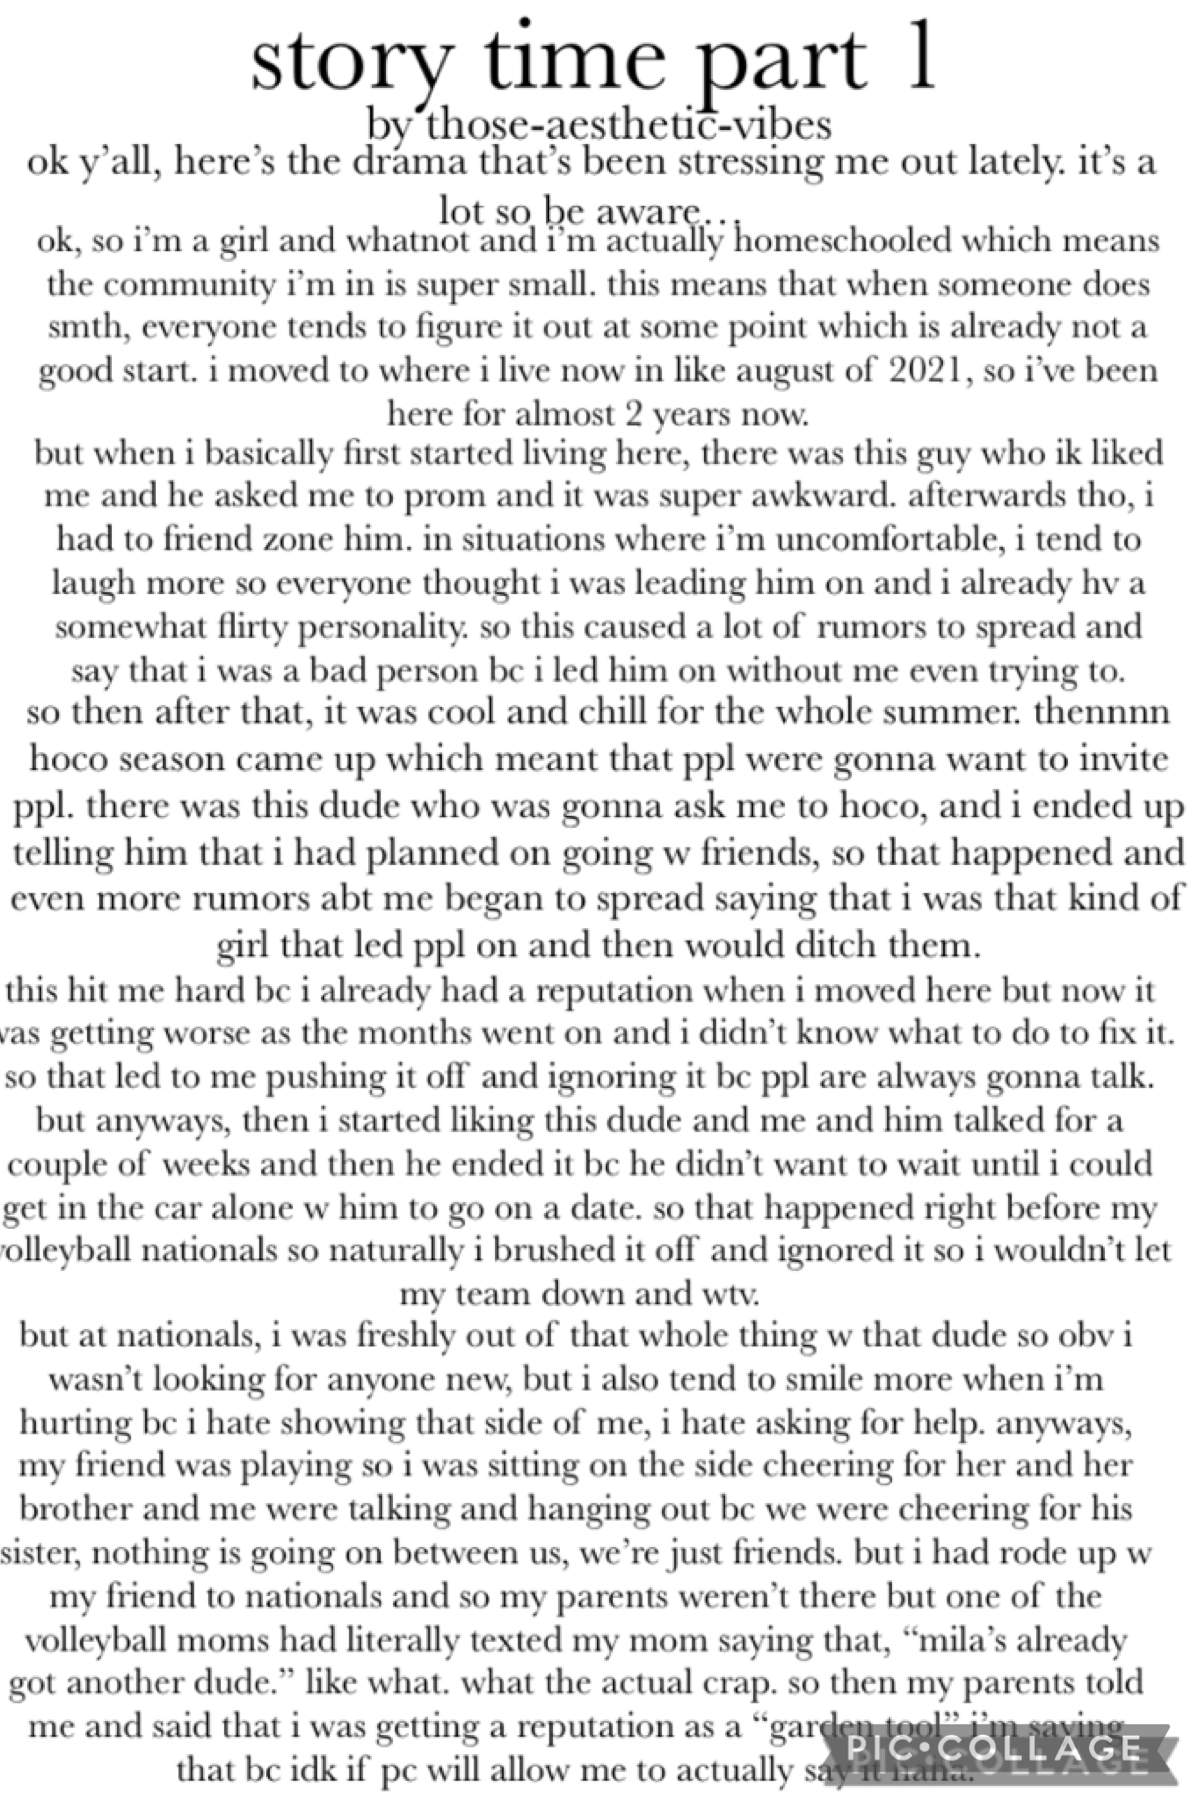 story time part 1
i thought it posted but it didn’t so here it is. part 2 is in the next post!